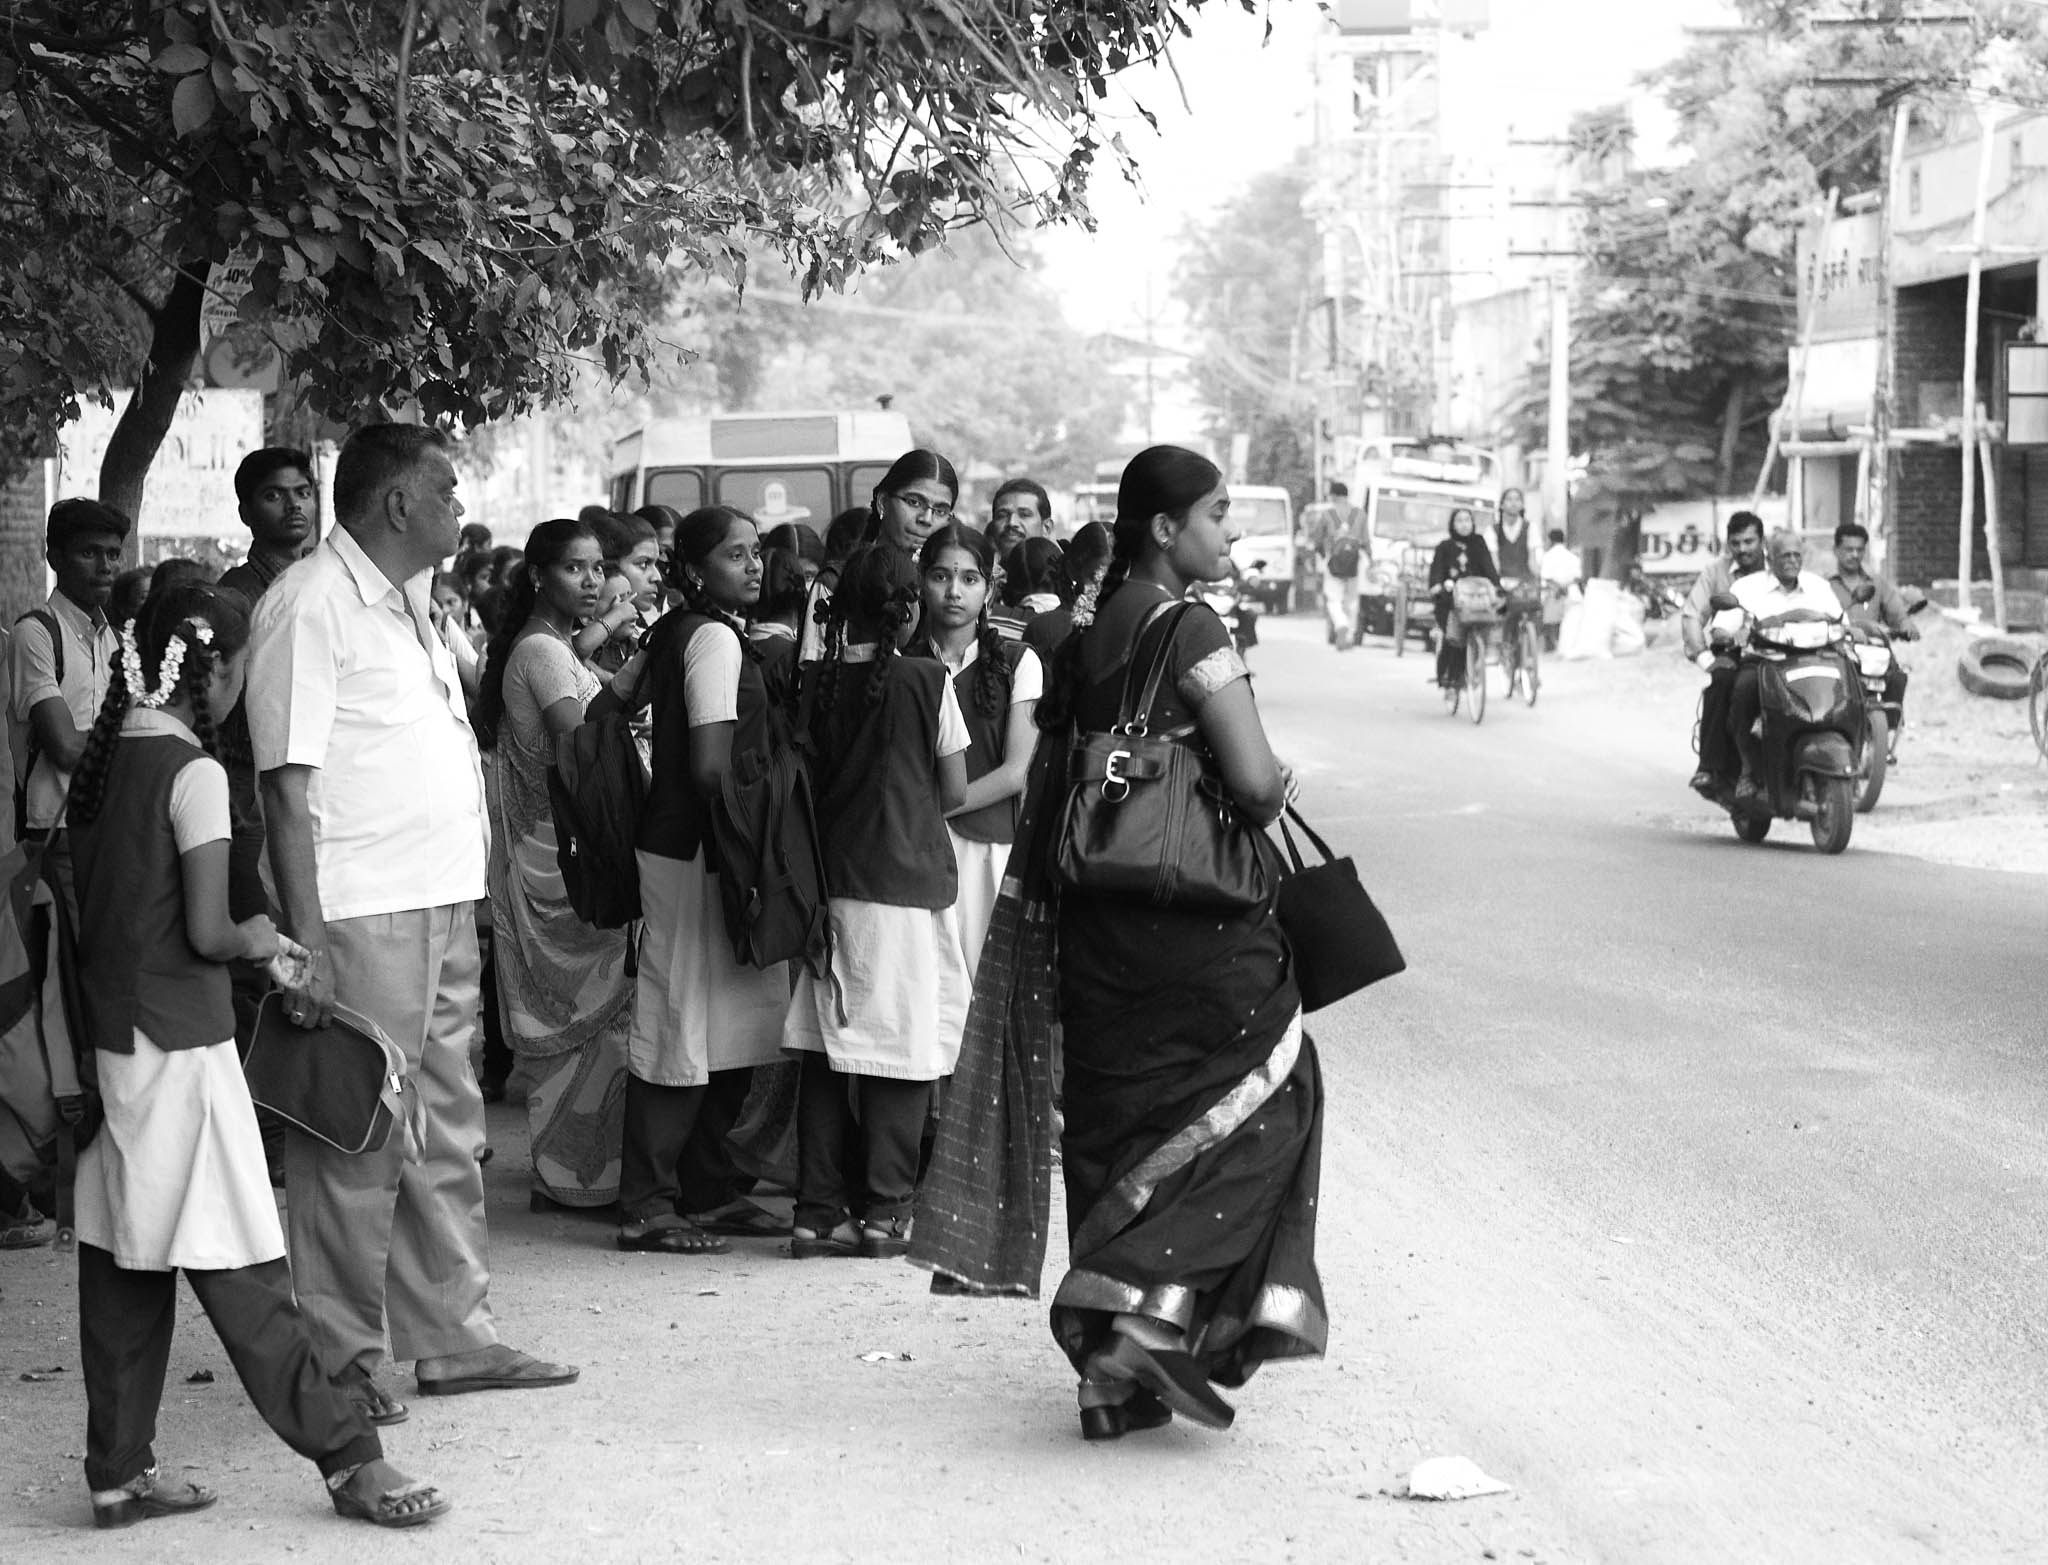 Students and staff are waiting for the city bus to home in the evening.
Virudhunagar, Tamil Nadu, India